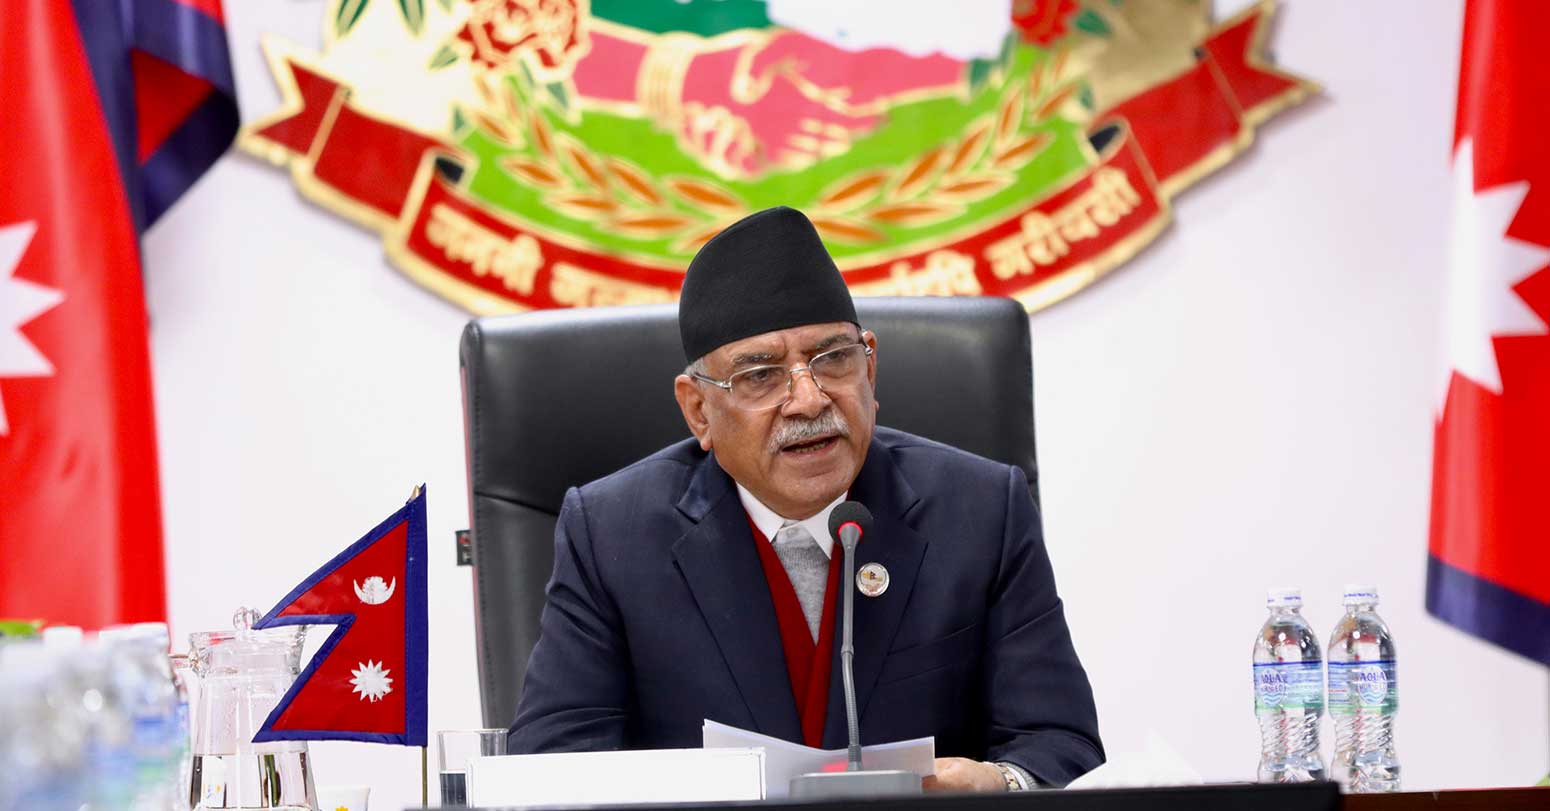 Three thousand more will be declared martyrs: Prime Minister Dahal